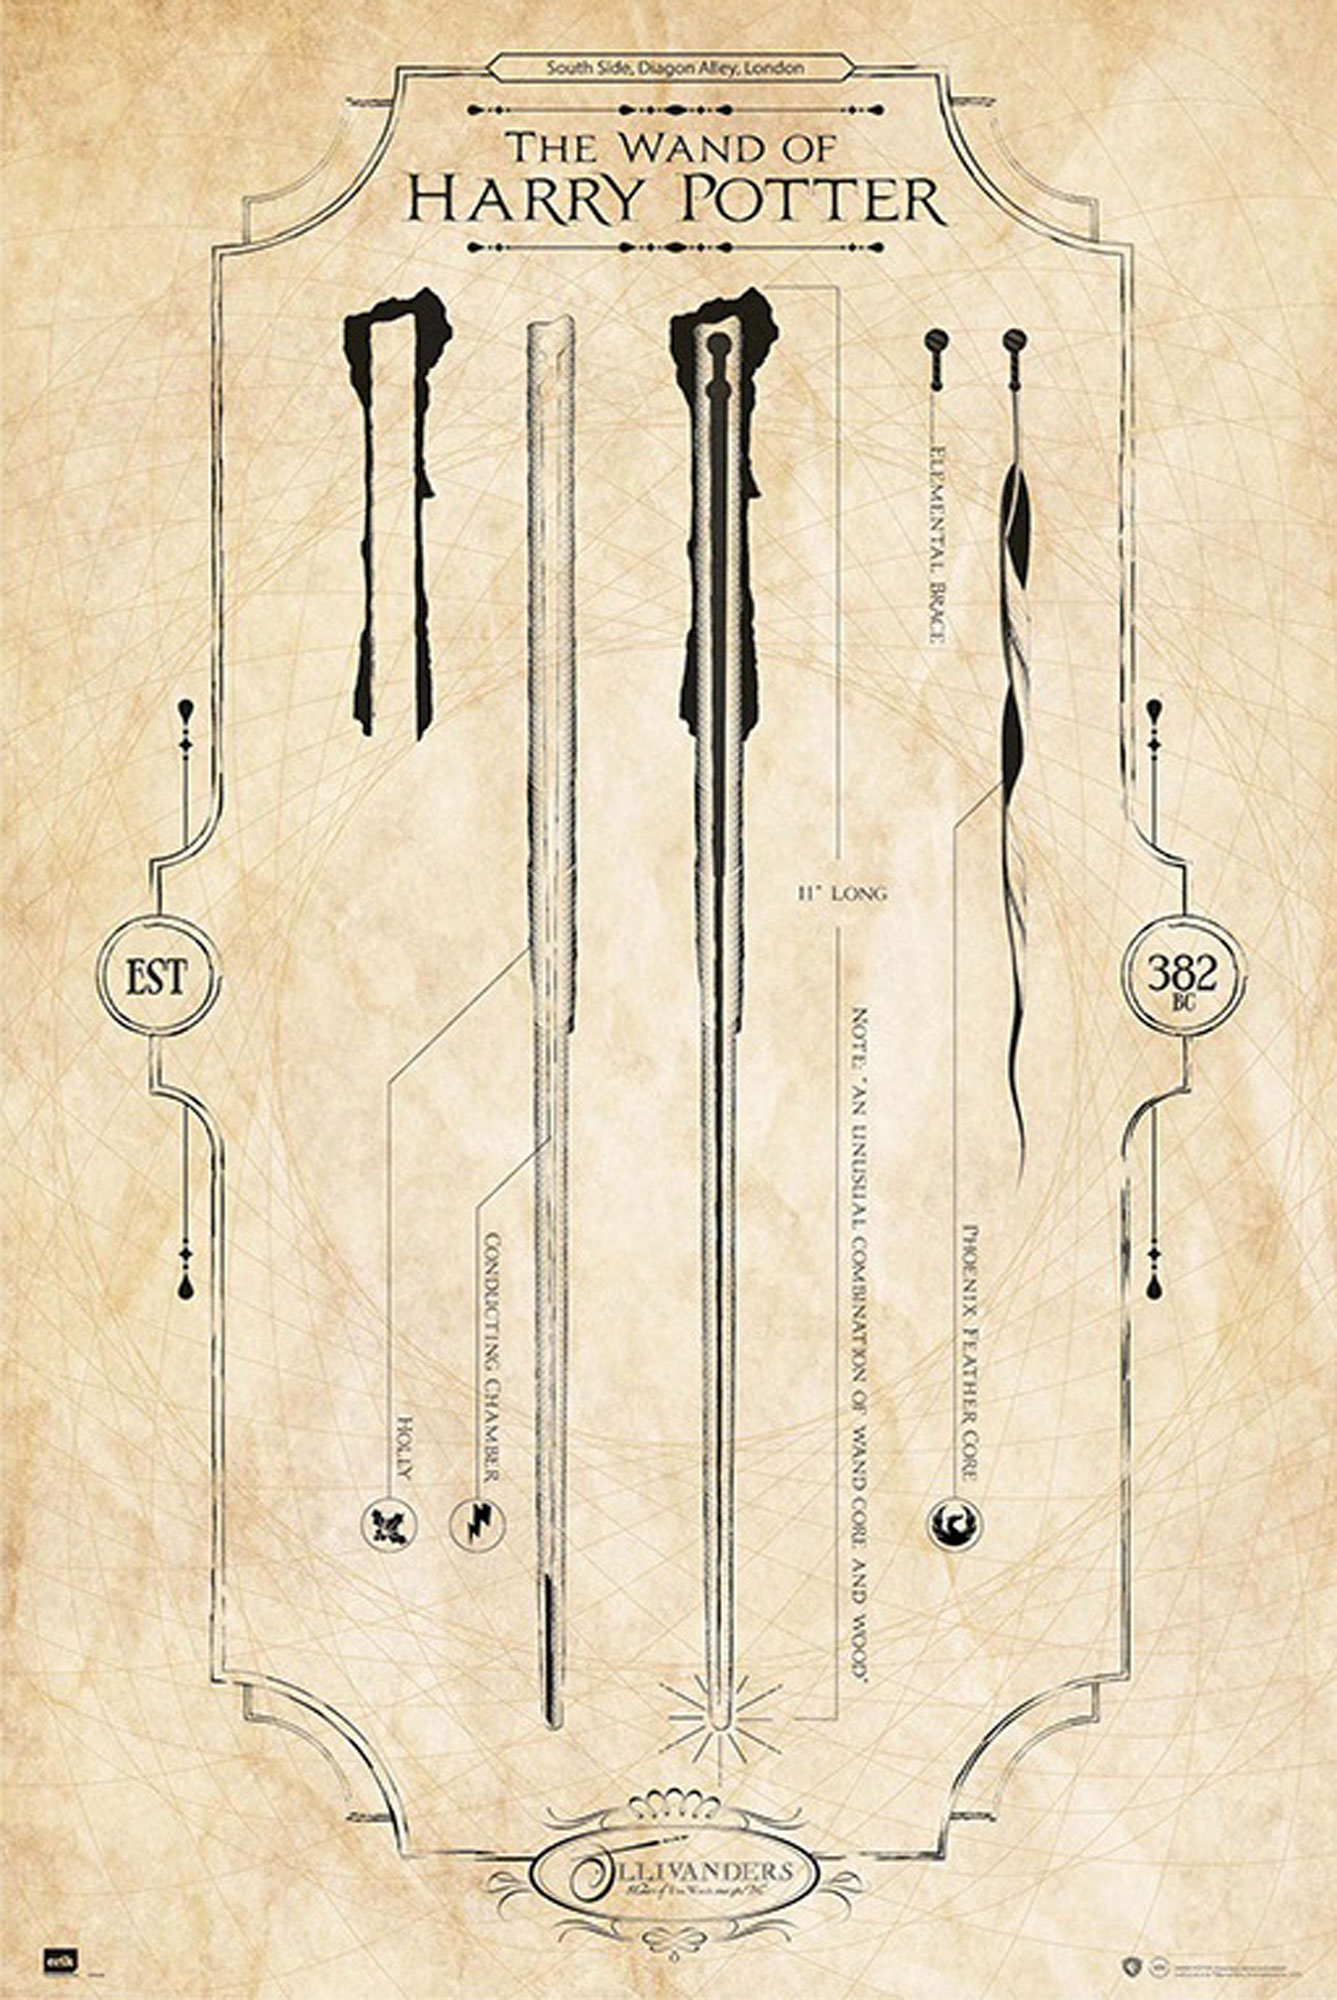 Harry Potter - Wand of Harry Potter